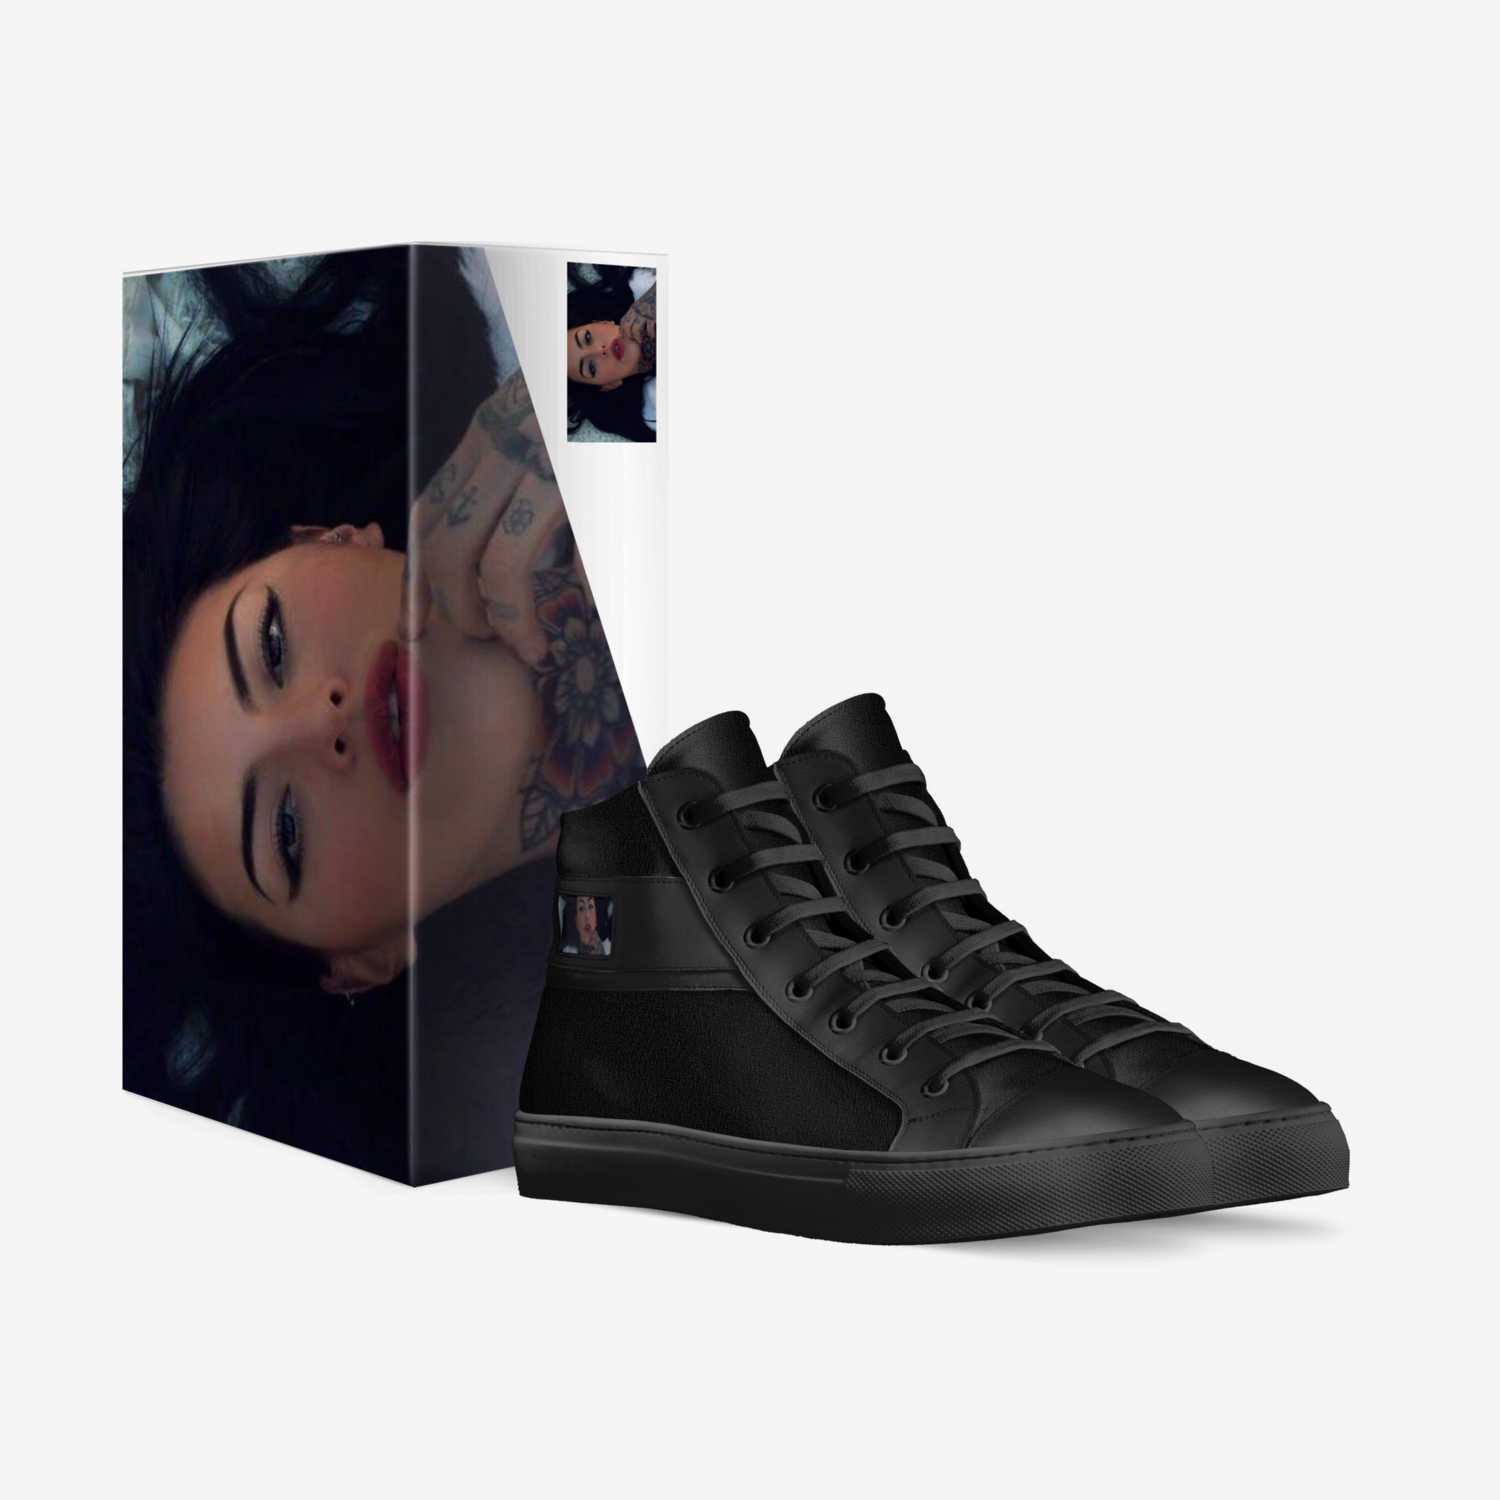 Inked Angelz  custom made in Italy shoes by Sherri Grant | Box view